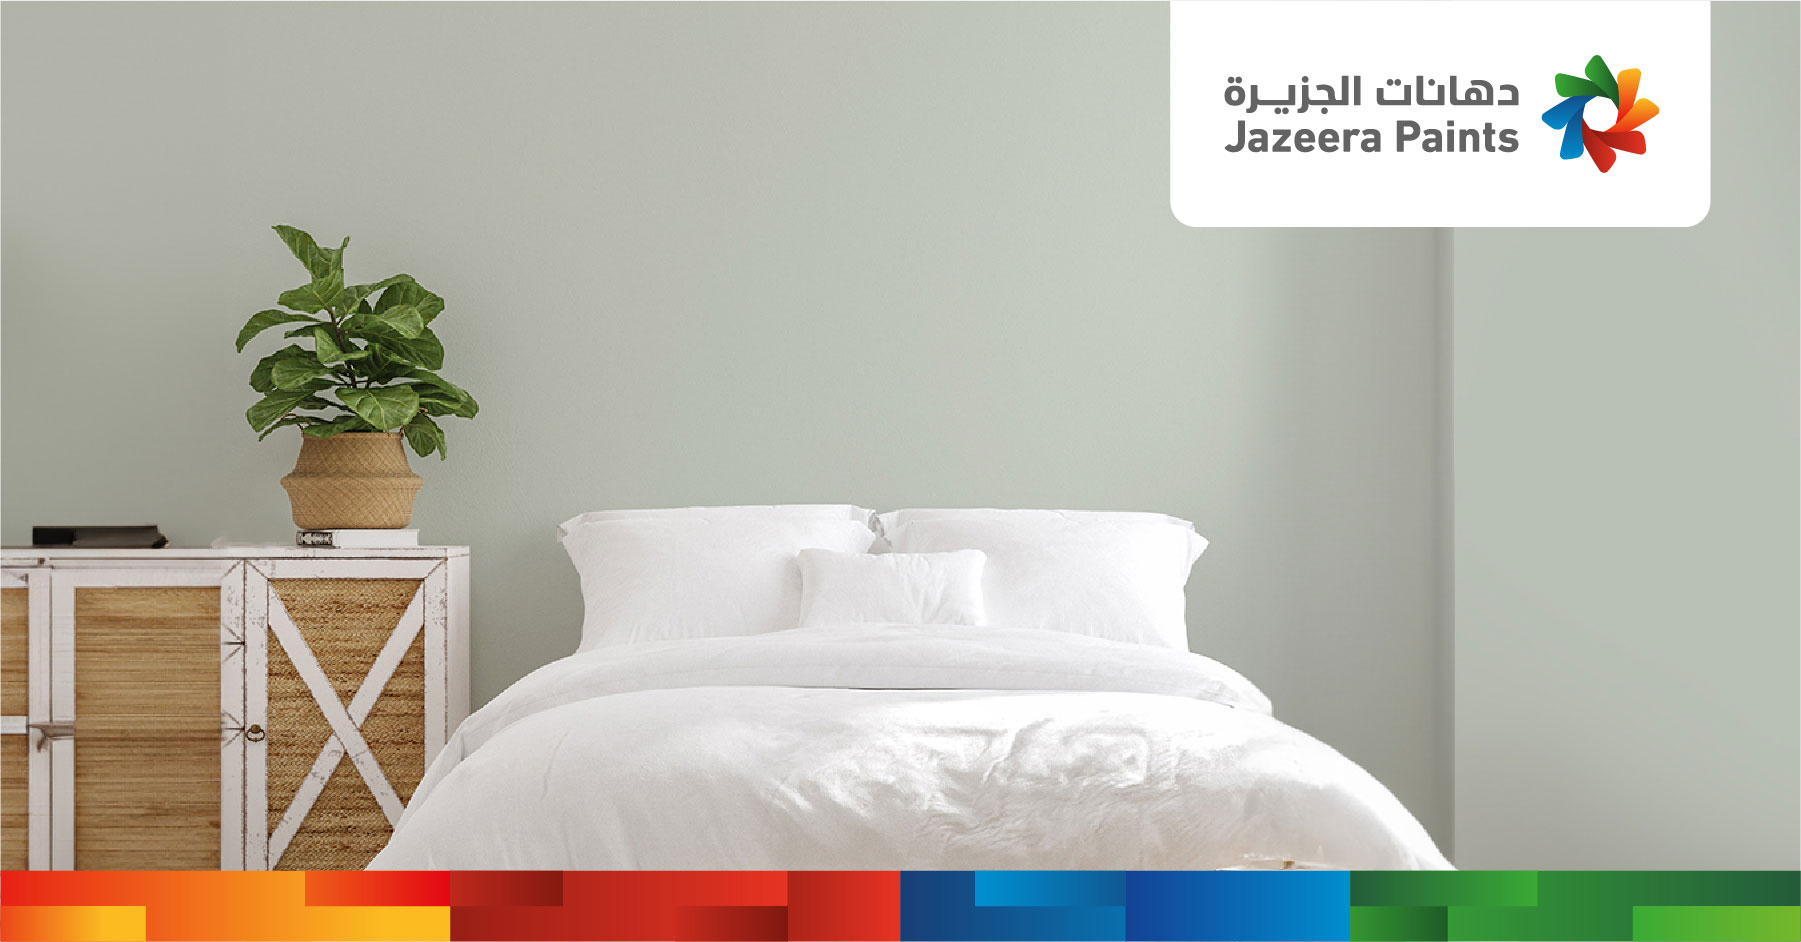 “Jazeera Paints”, the leading company in the industry of paints